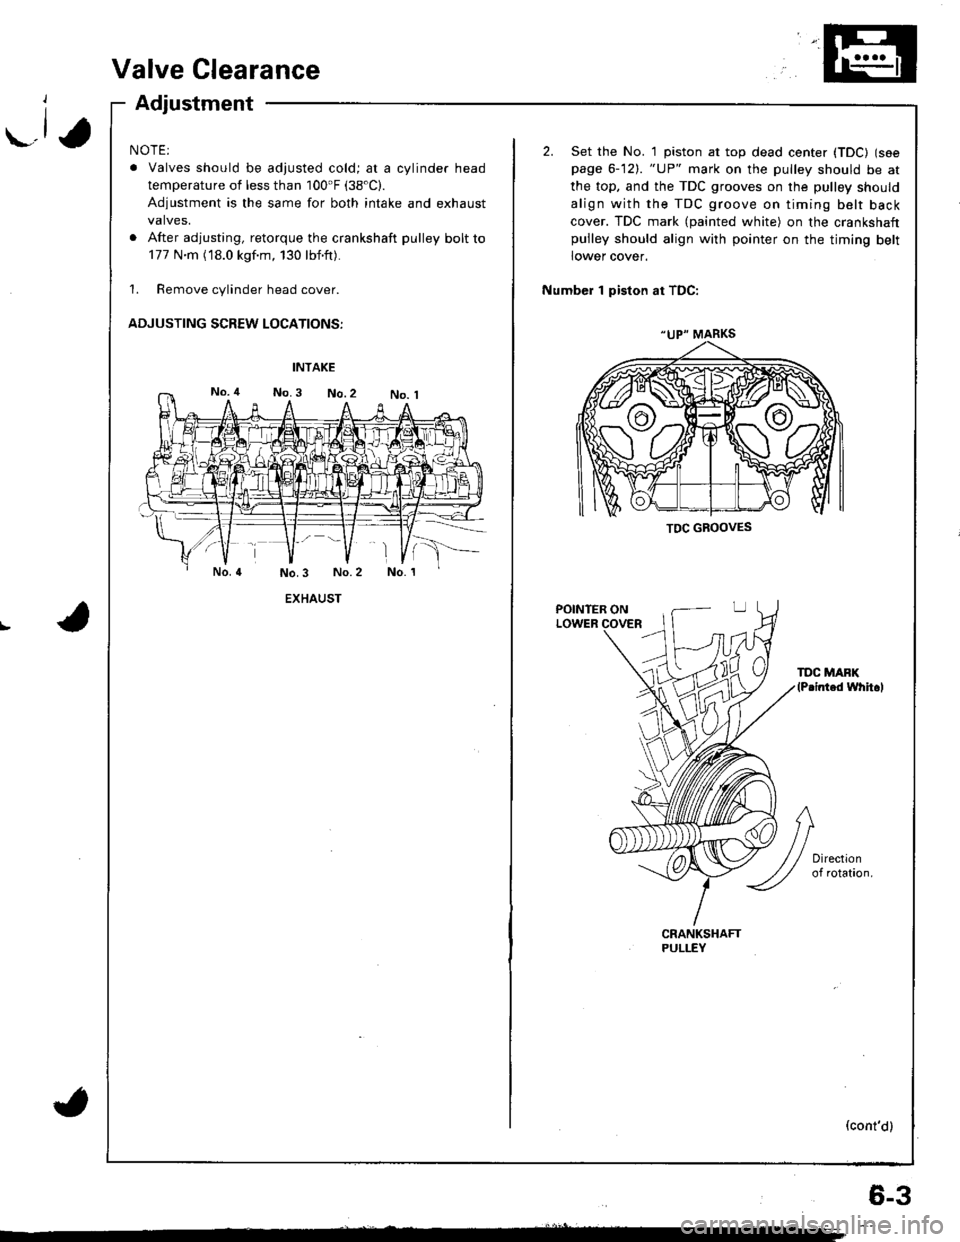 HONDA INTEGRA 1998 4.G Workshop Manual r.lJ
Valve Clearance
Adjustment
NOTE:
. Valves should be adjusted cold; at a cylinder head
temperature of less than 100F (38"C).
Adjustment is the same for both intake and exhaust
valves.
. After adj